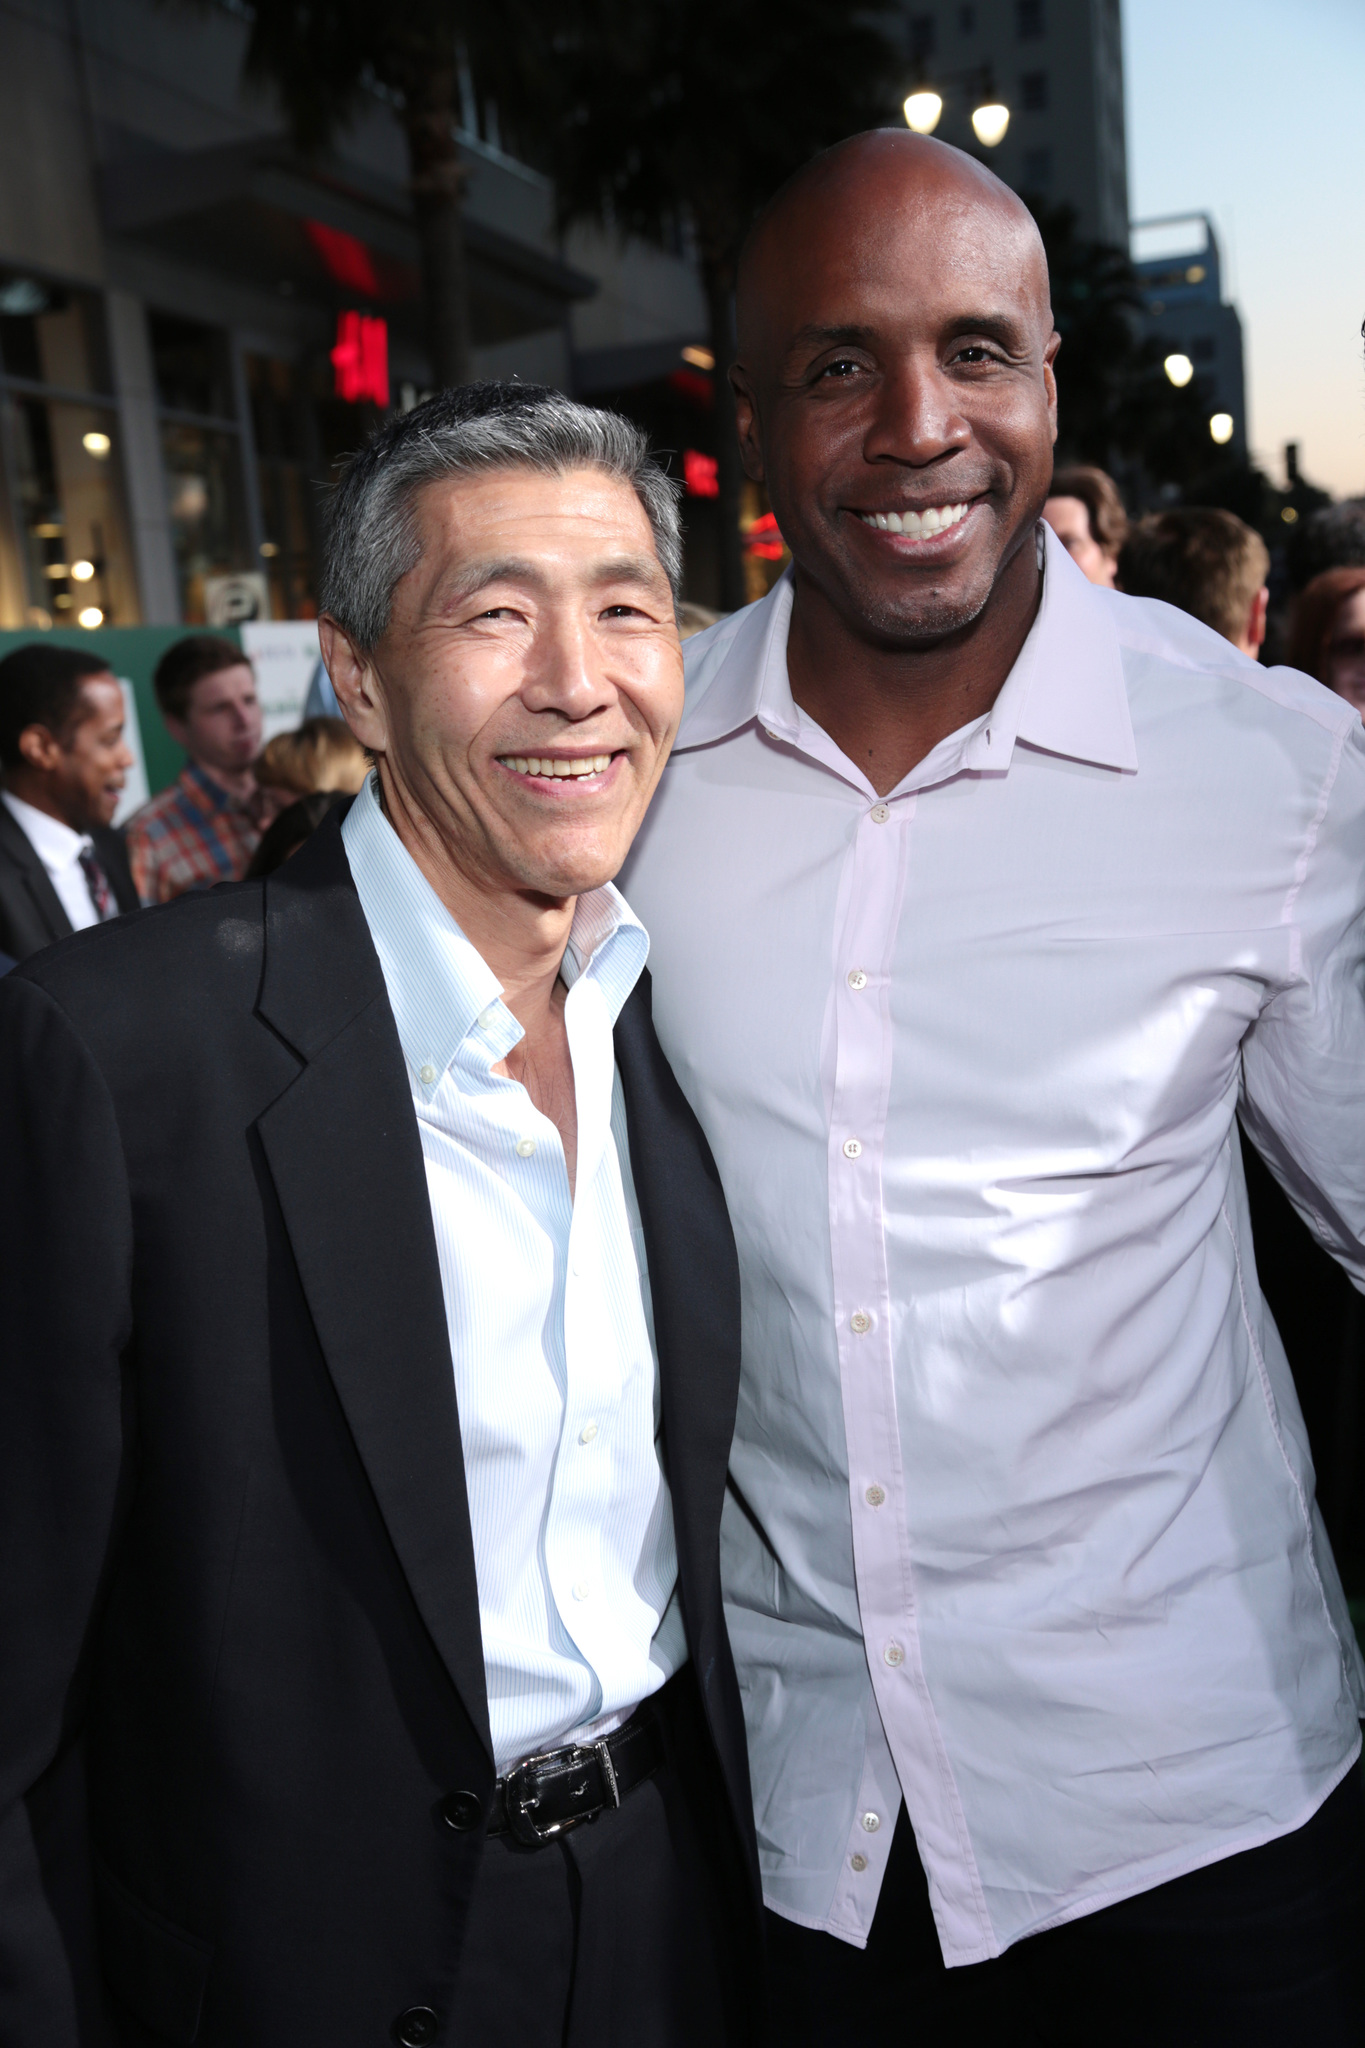 Barry Bonds and Will Chang at event of Million Dollar Arm (2014)